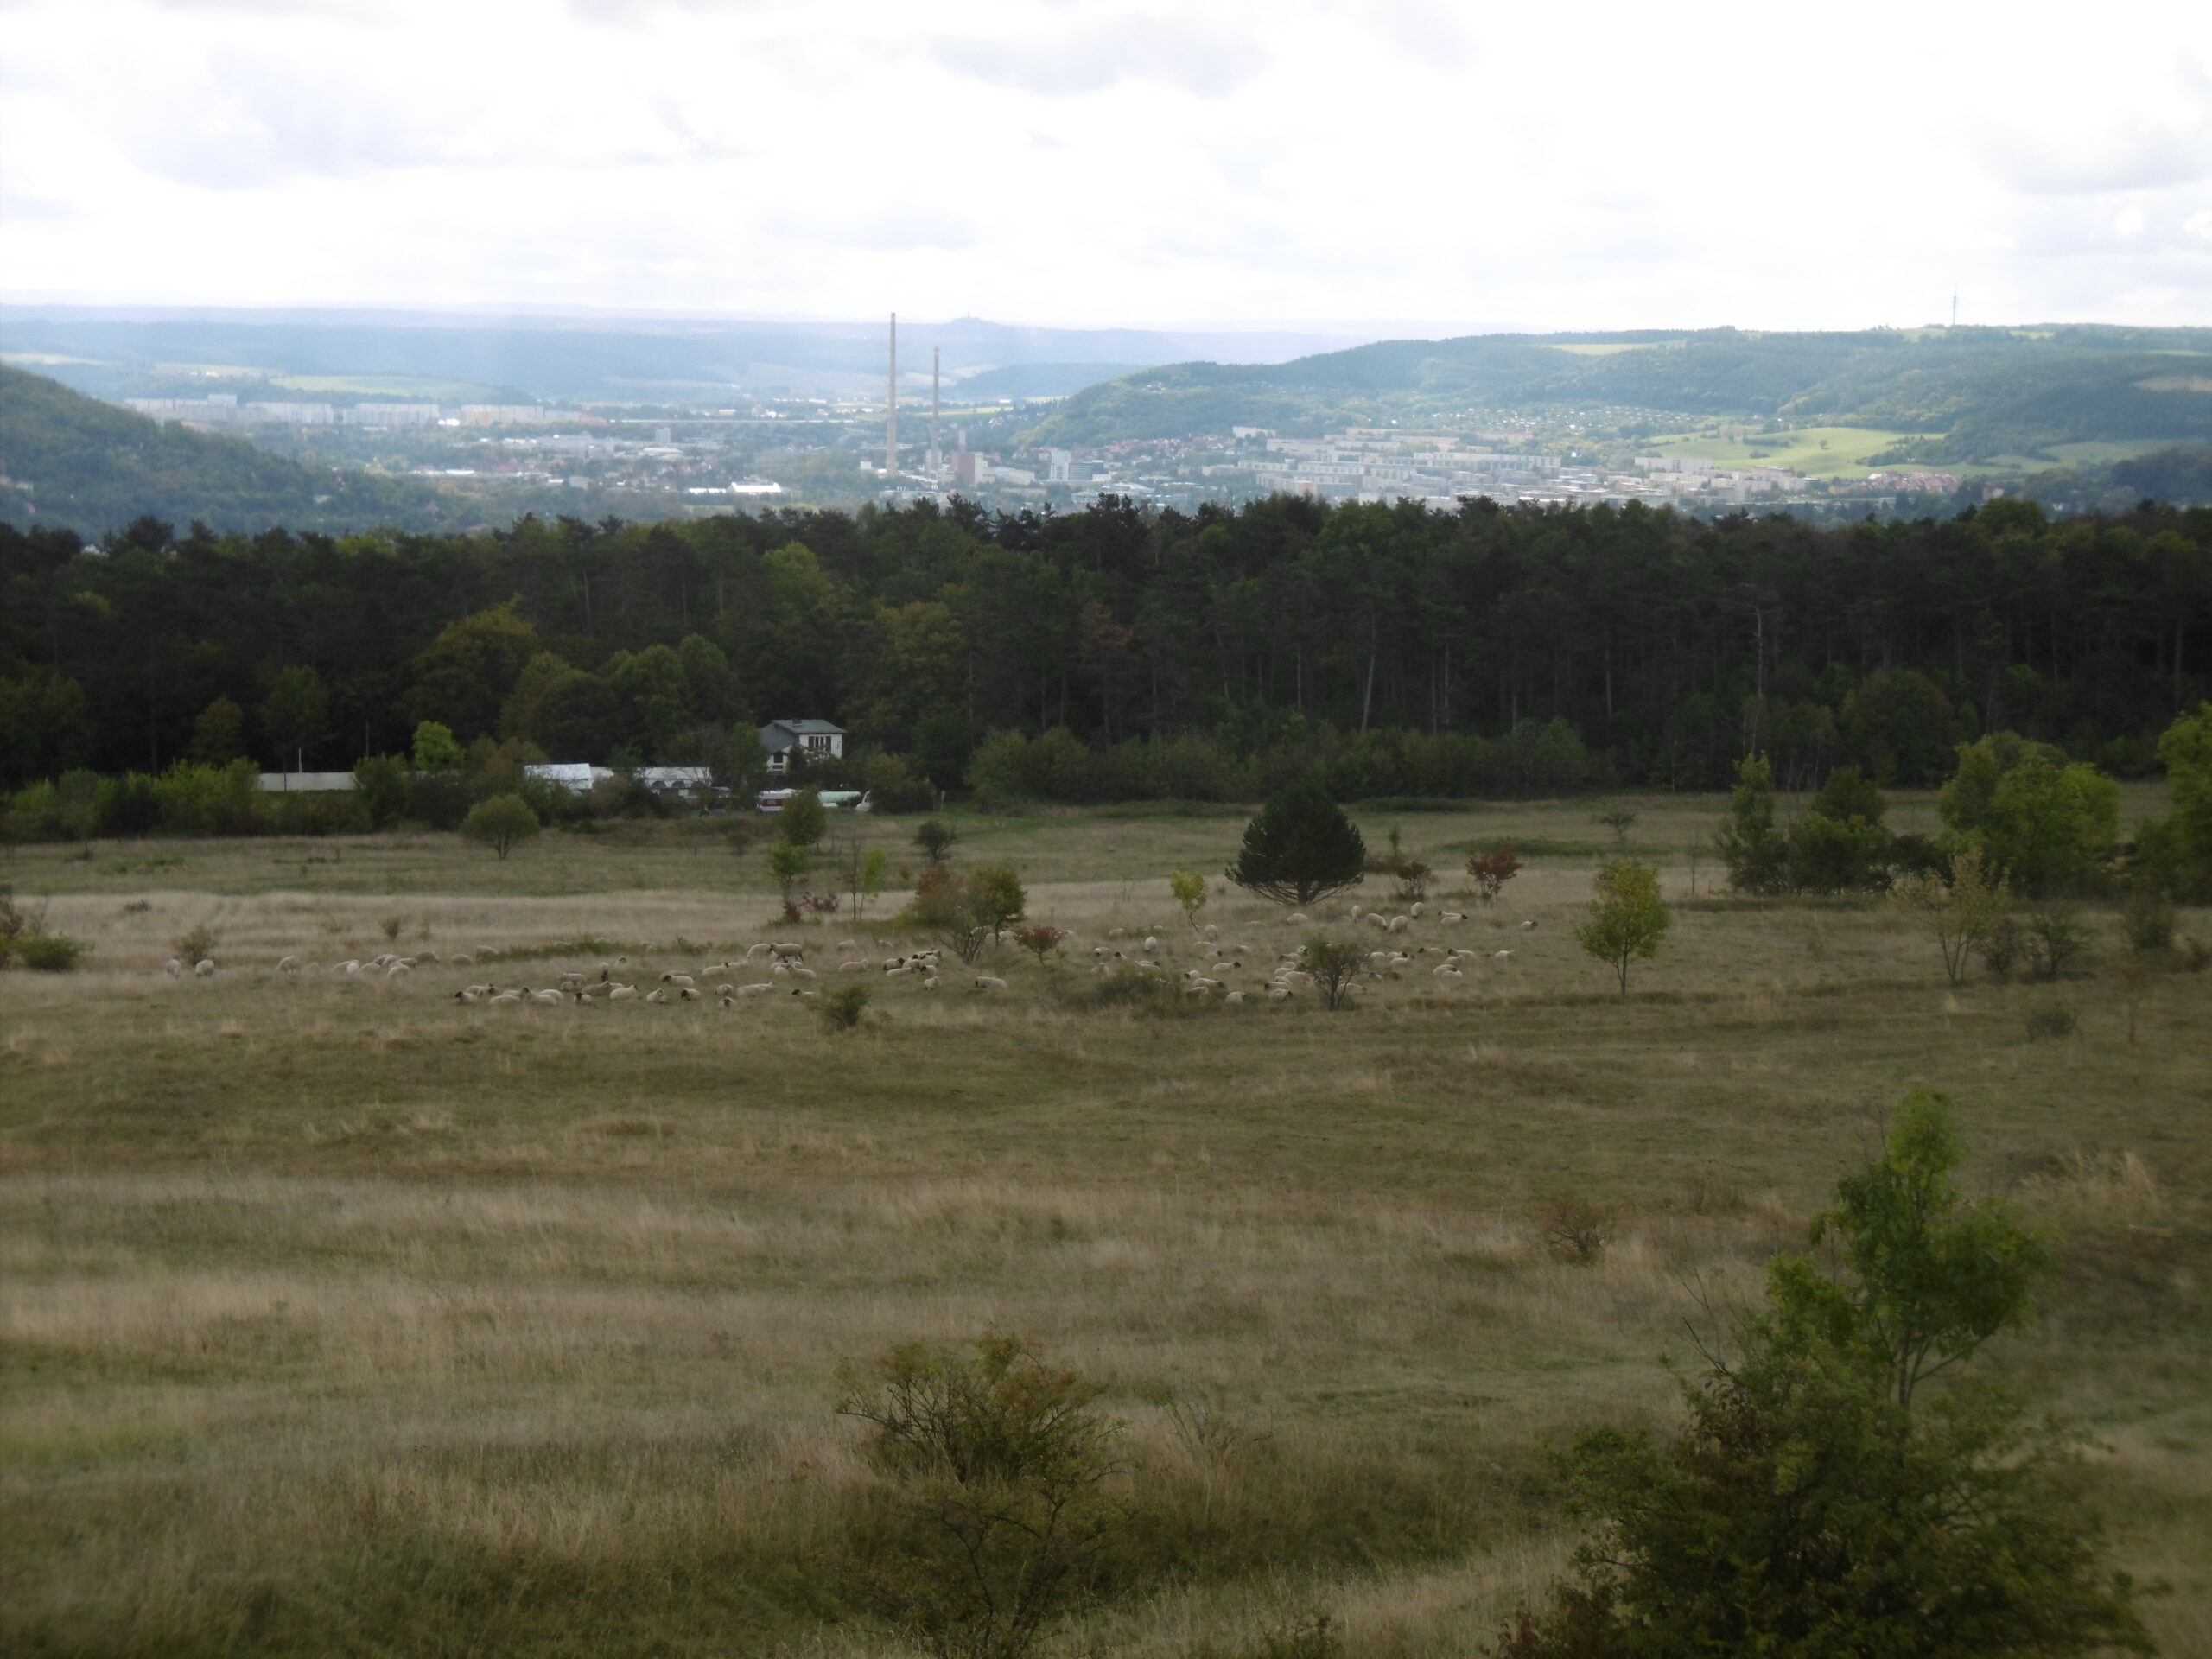 a field looking towards a flock of sheep, a second-growth deciduous forest, and a small town in a valley